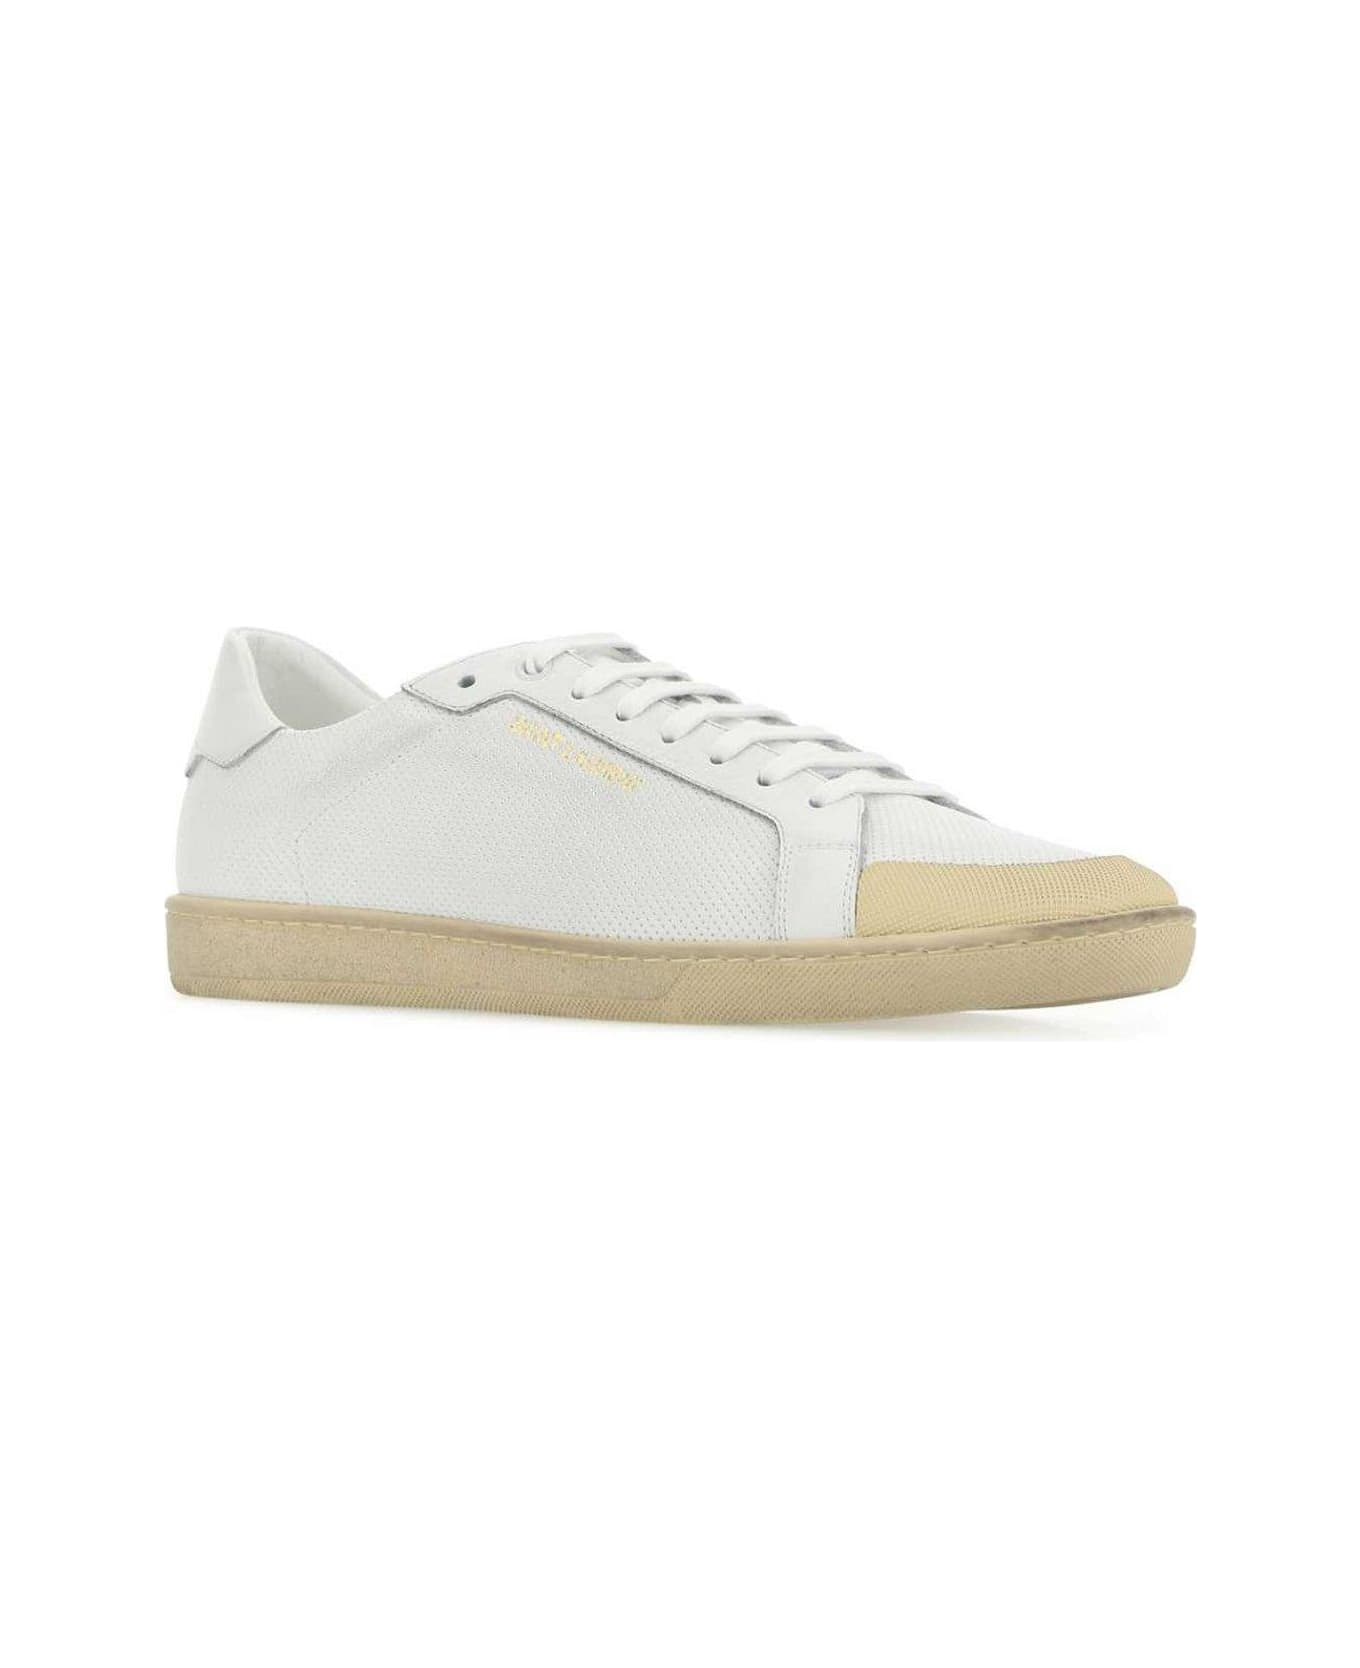 Saint Laurent Round Toe Lace-up Sneakers - Bianco スニーカー